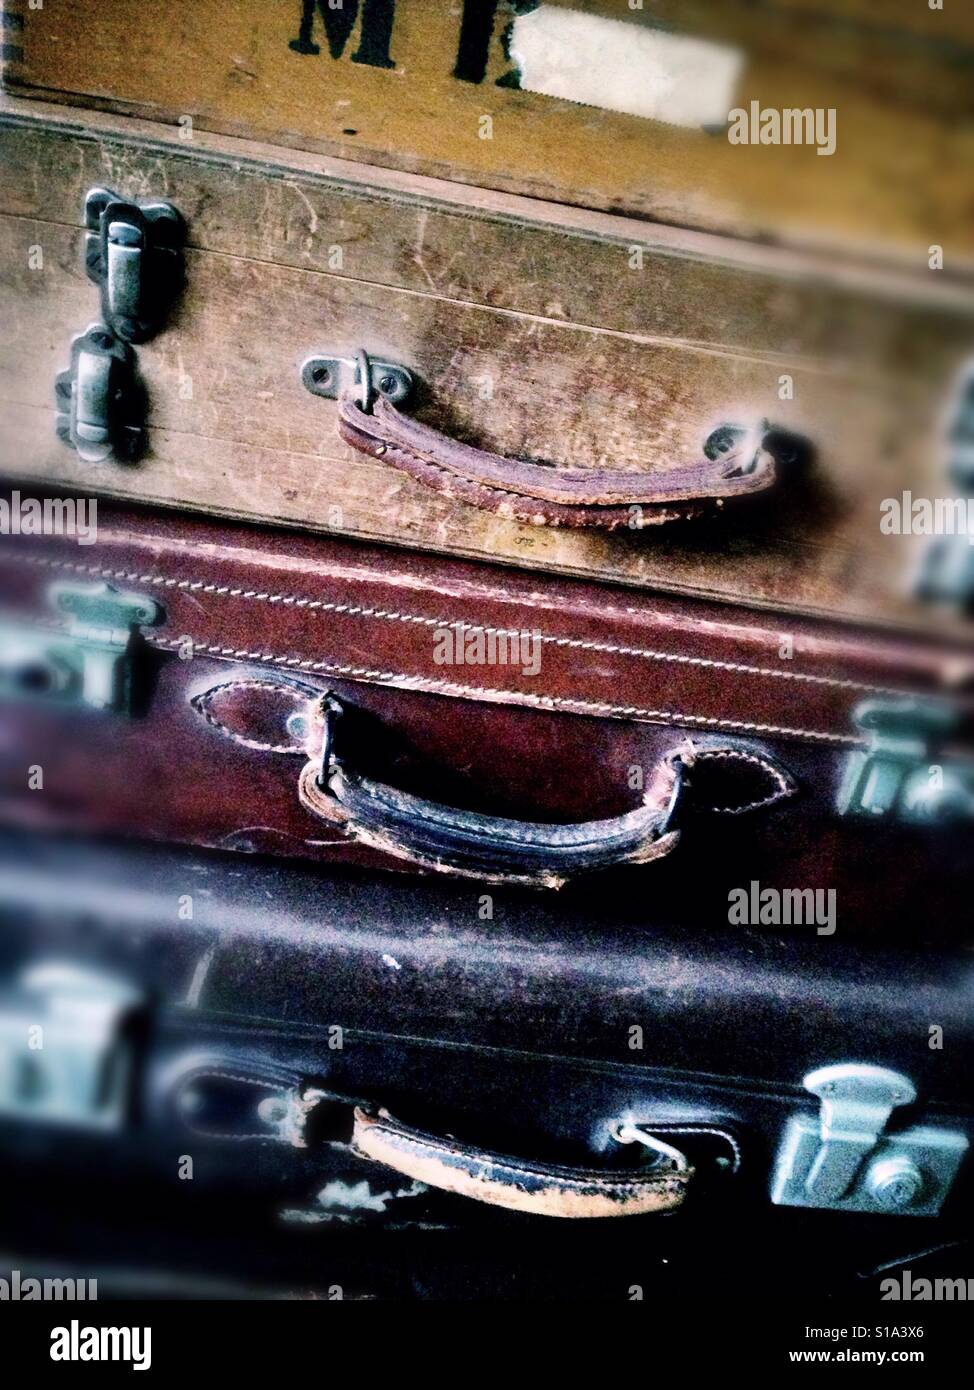 A stack of vintage Suitcases Stock Photo